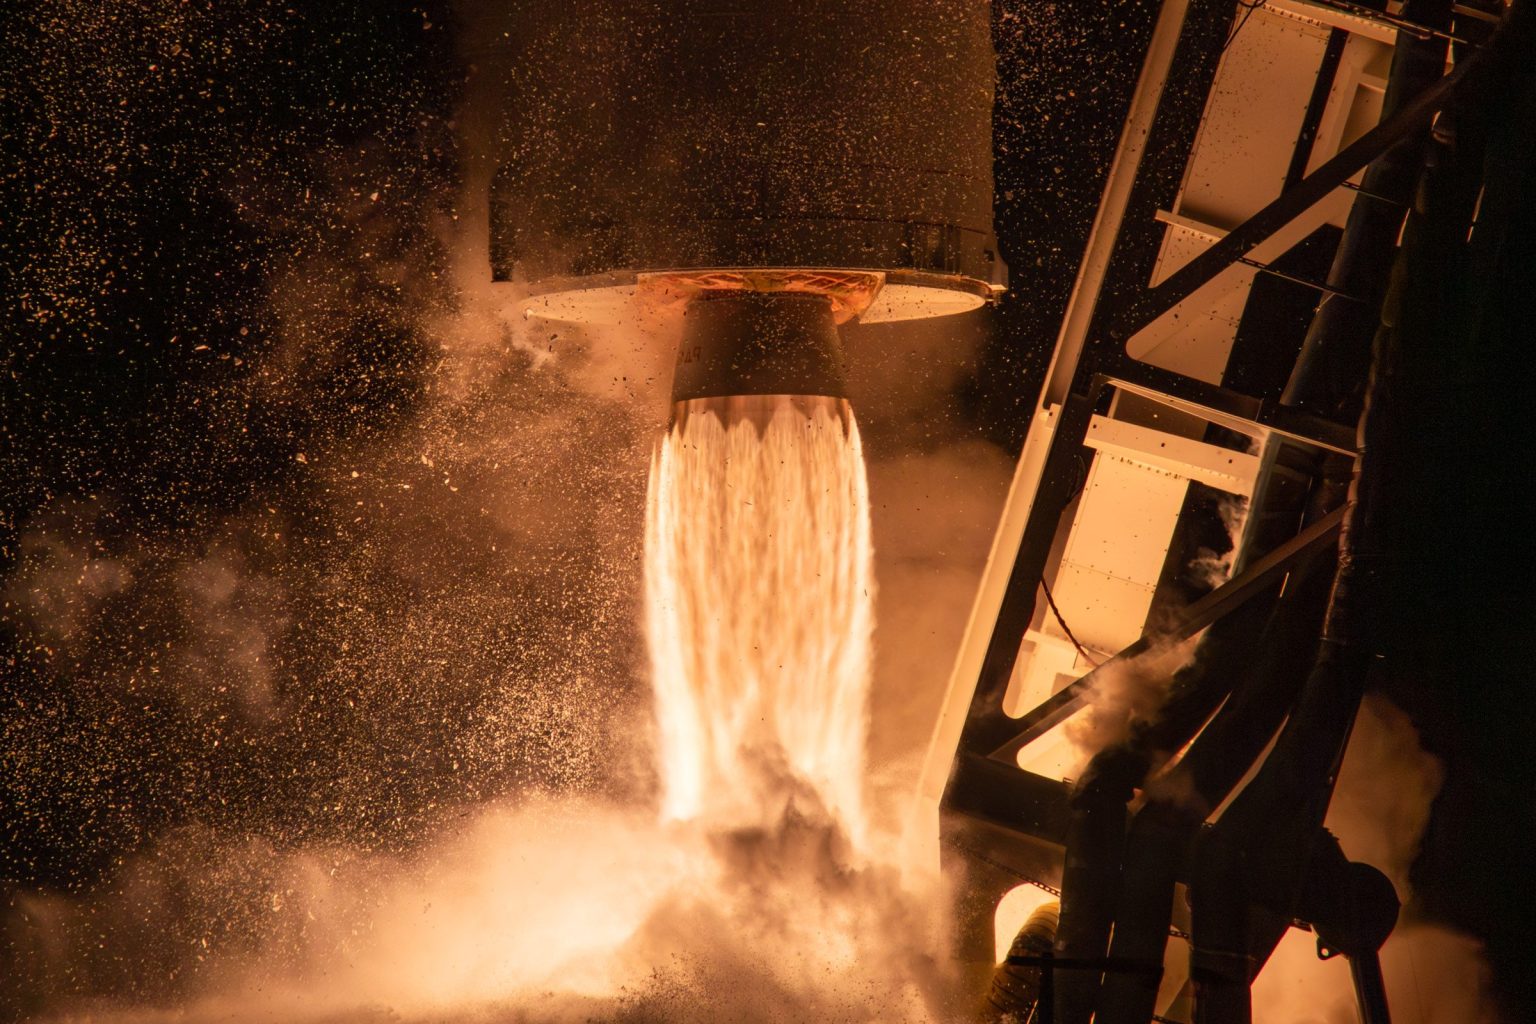 The bottom portion of the Antares rocket showing the flames from the engines during liftoff.